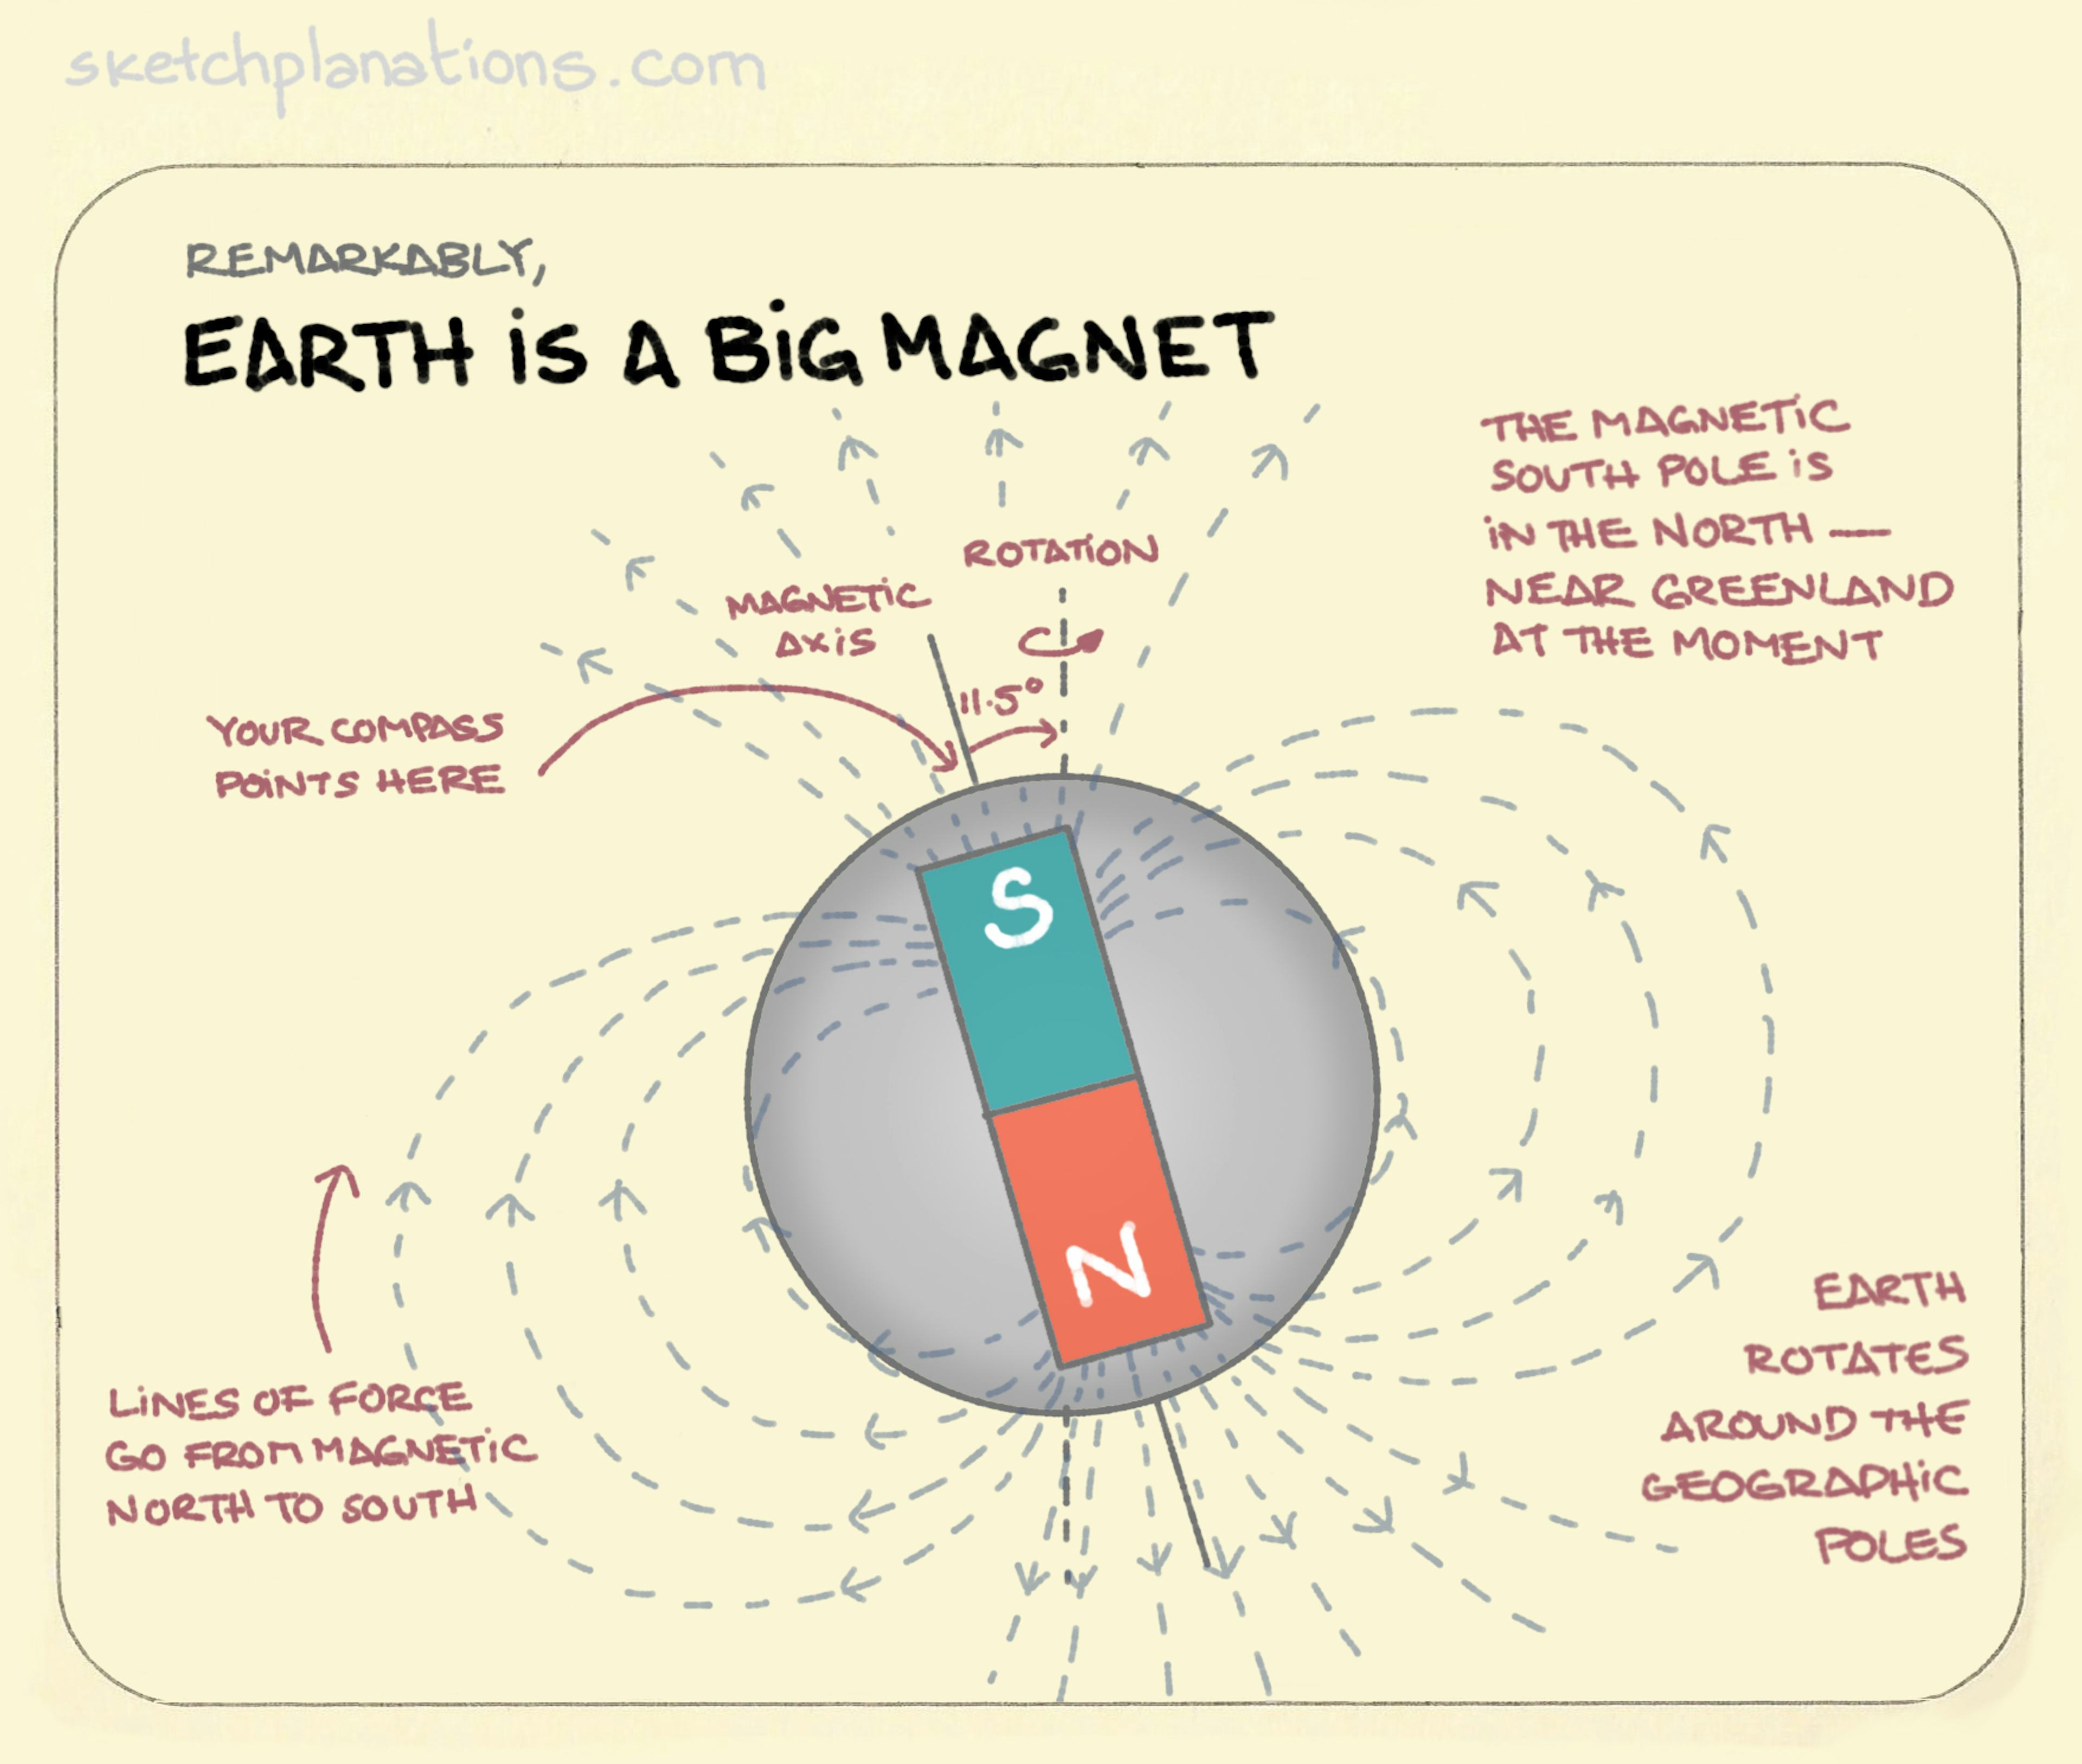 Earth is a big magnet. - Sketchplanations